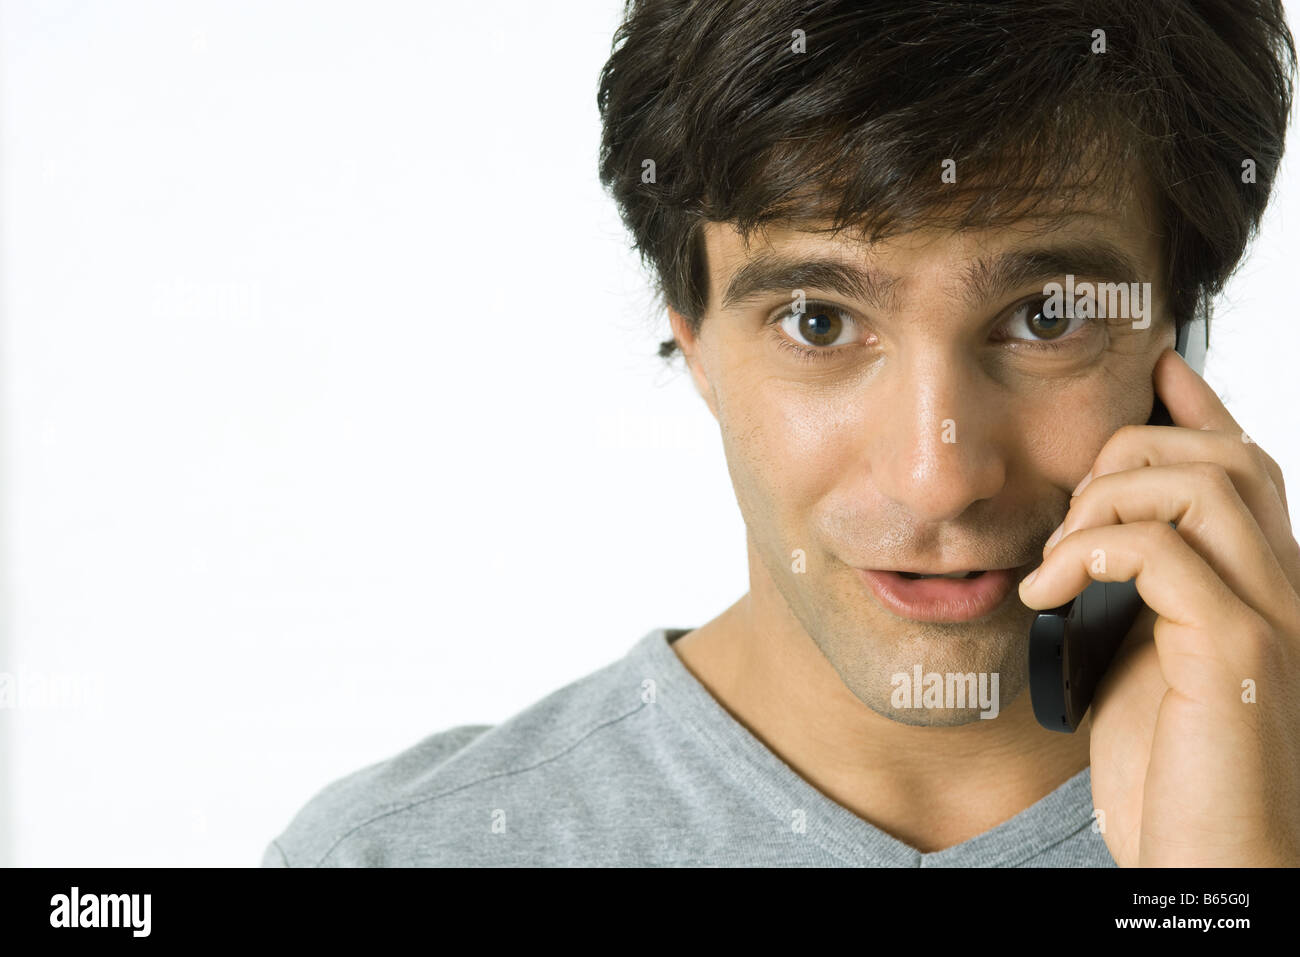 Man using cell phone, making faces at camera, portrait Stock Photo